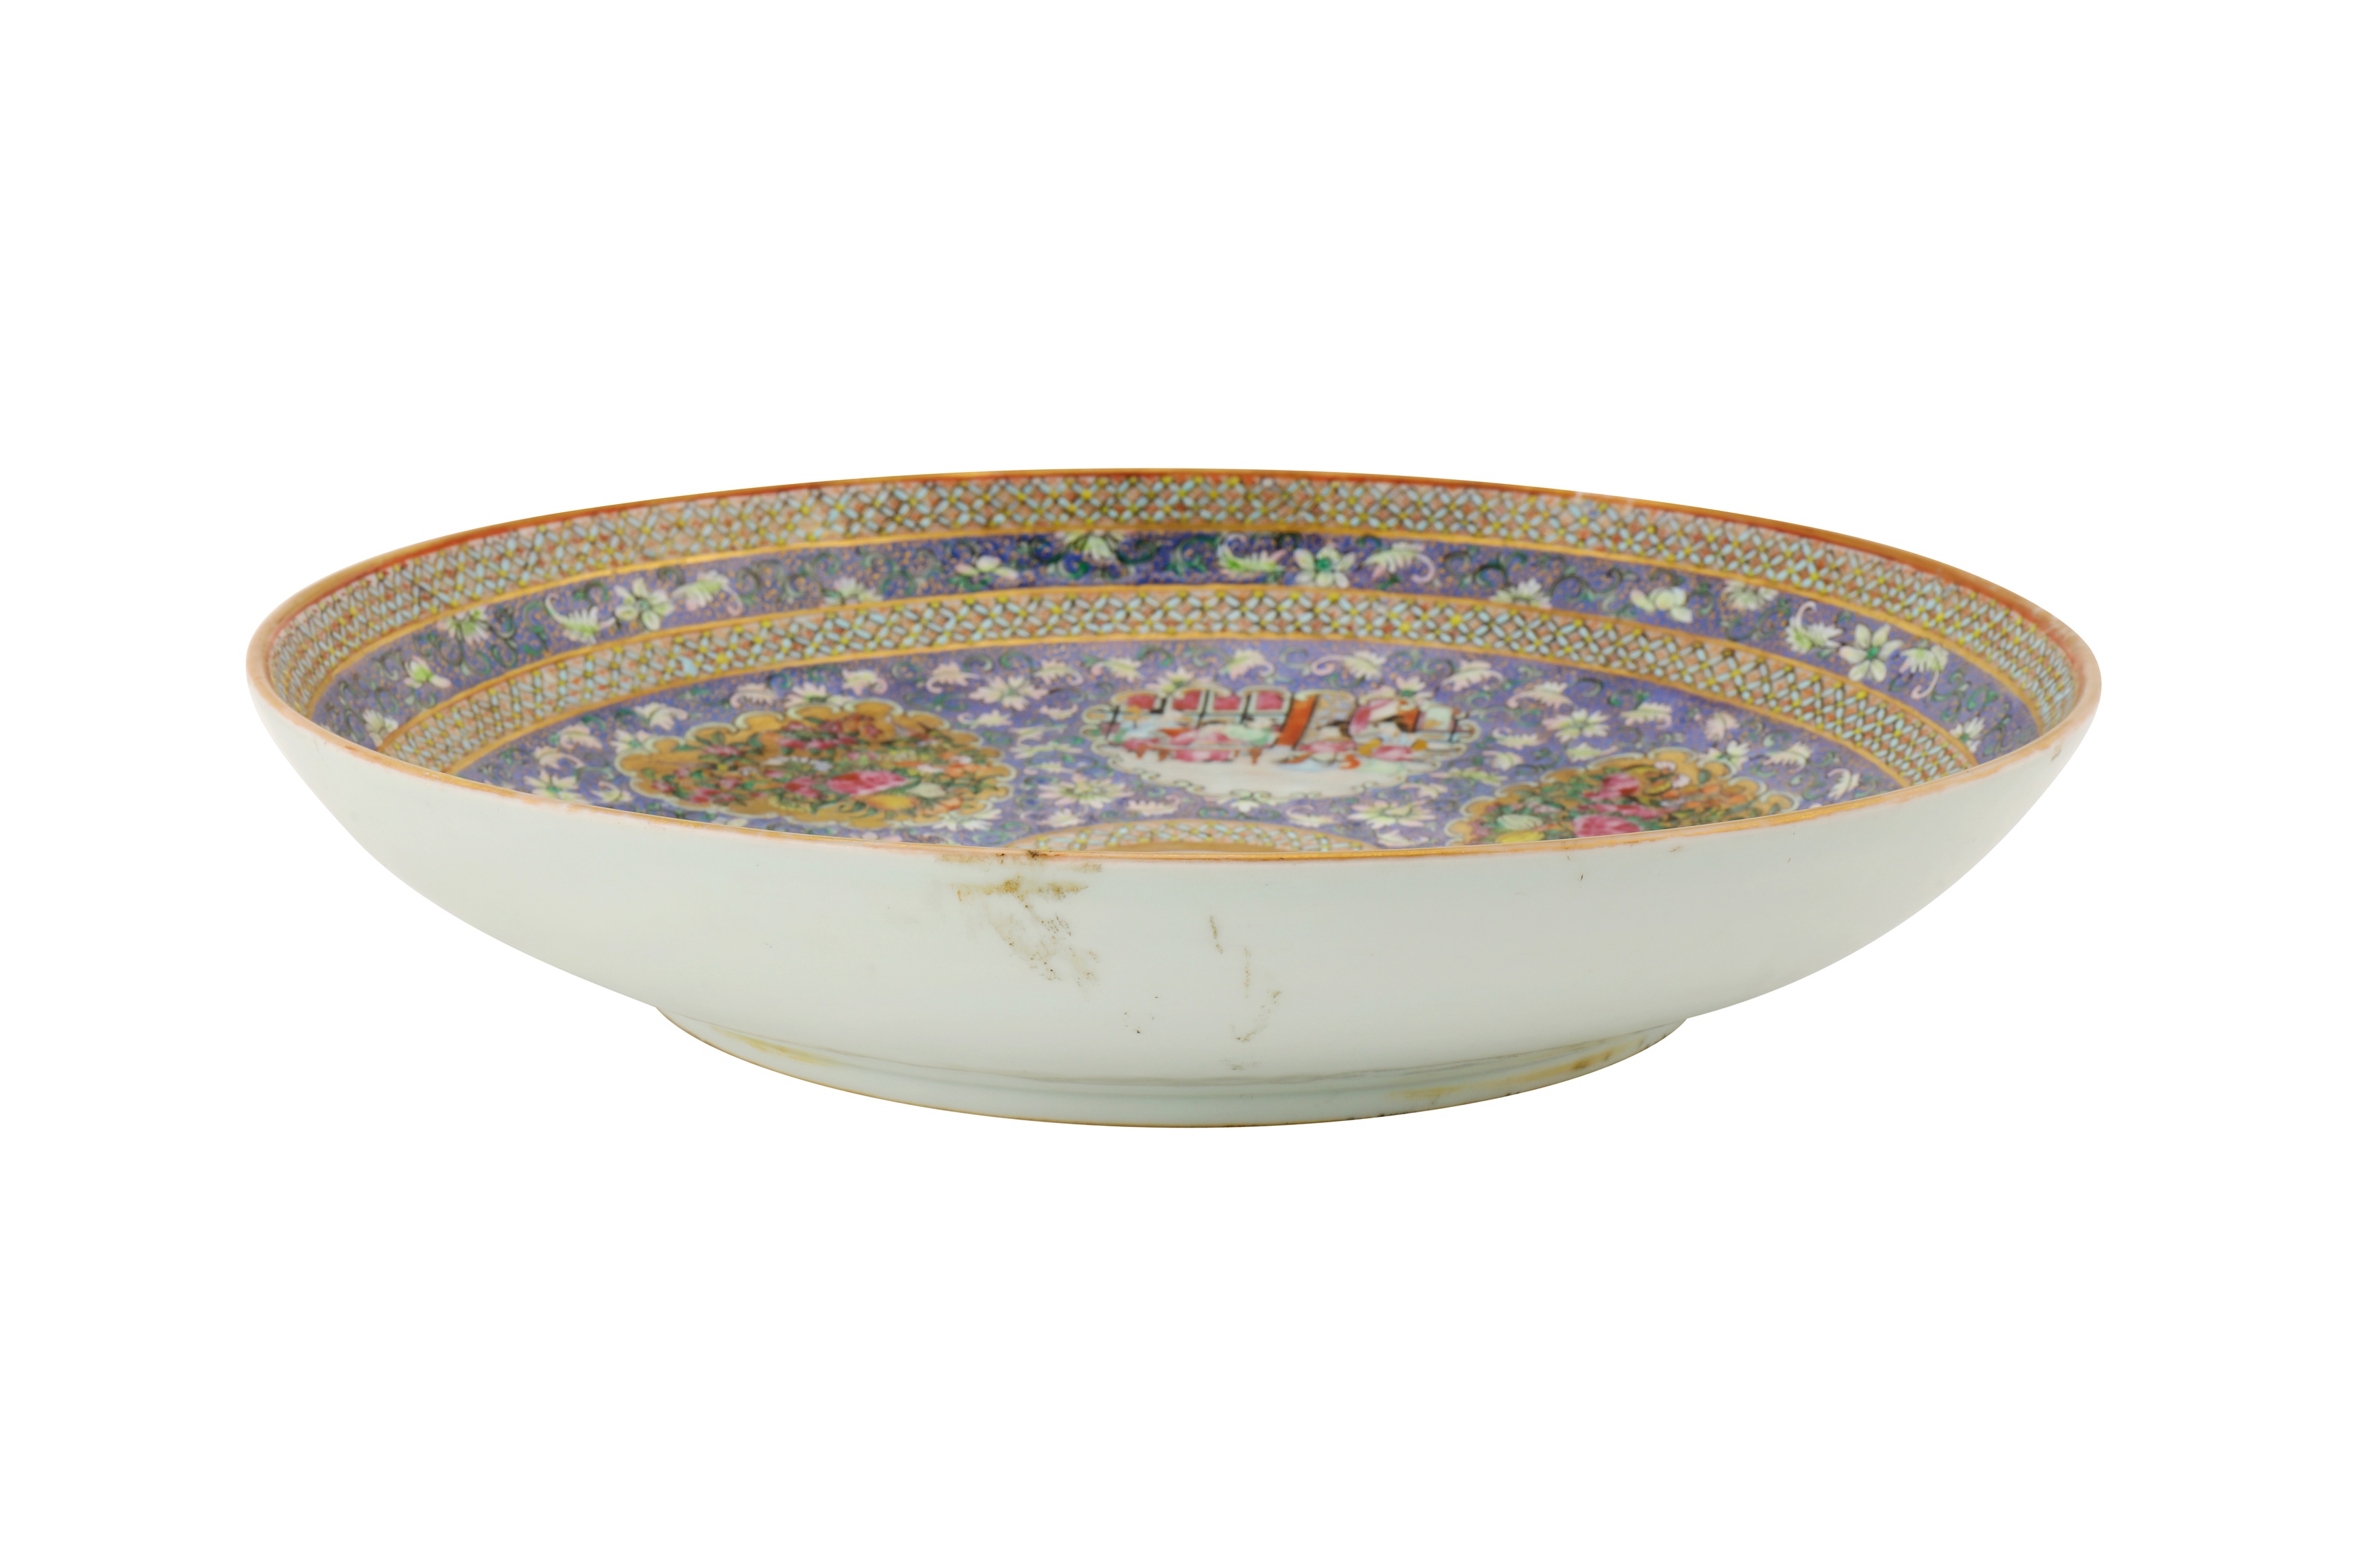 A LARGE BOWL AND DISH FROM THE ZILL AL-SULTAN CANTON PORCELAIN SERVICE - Image 7 of 8